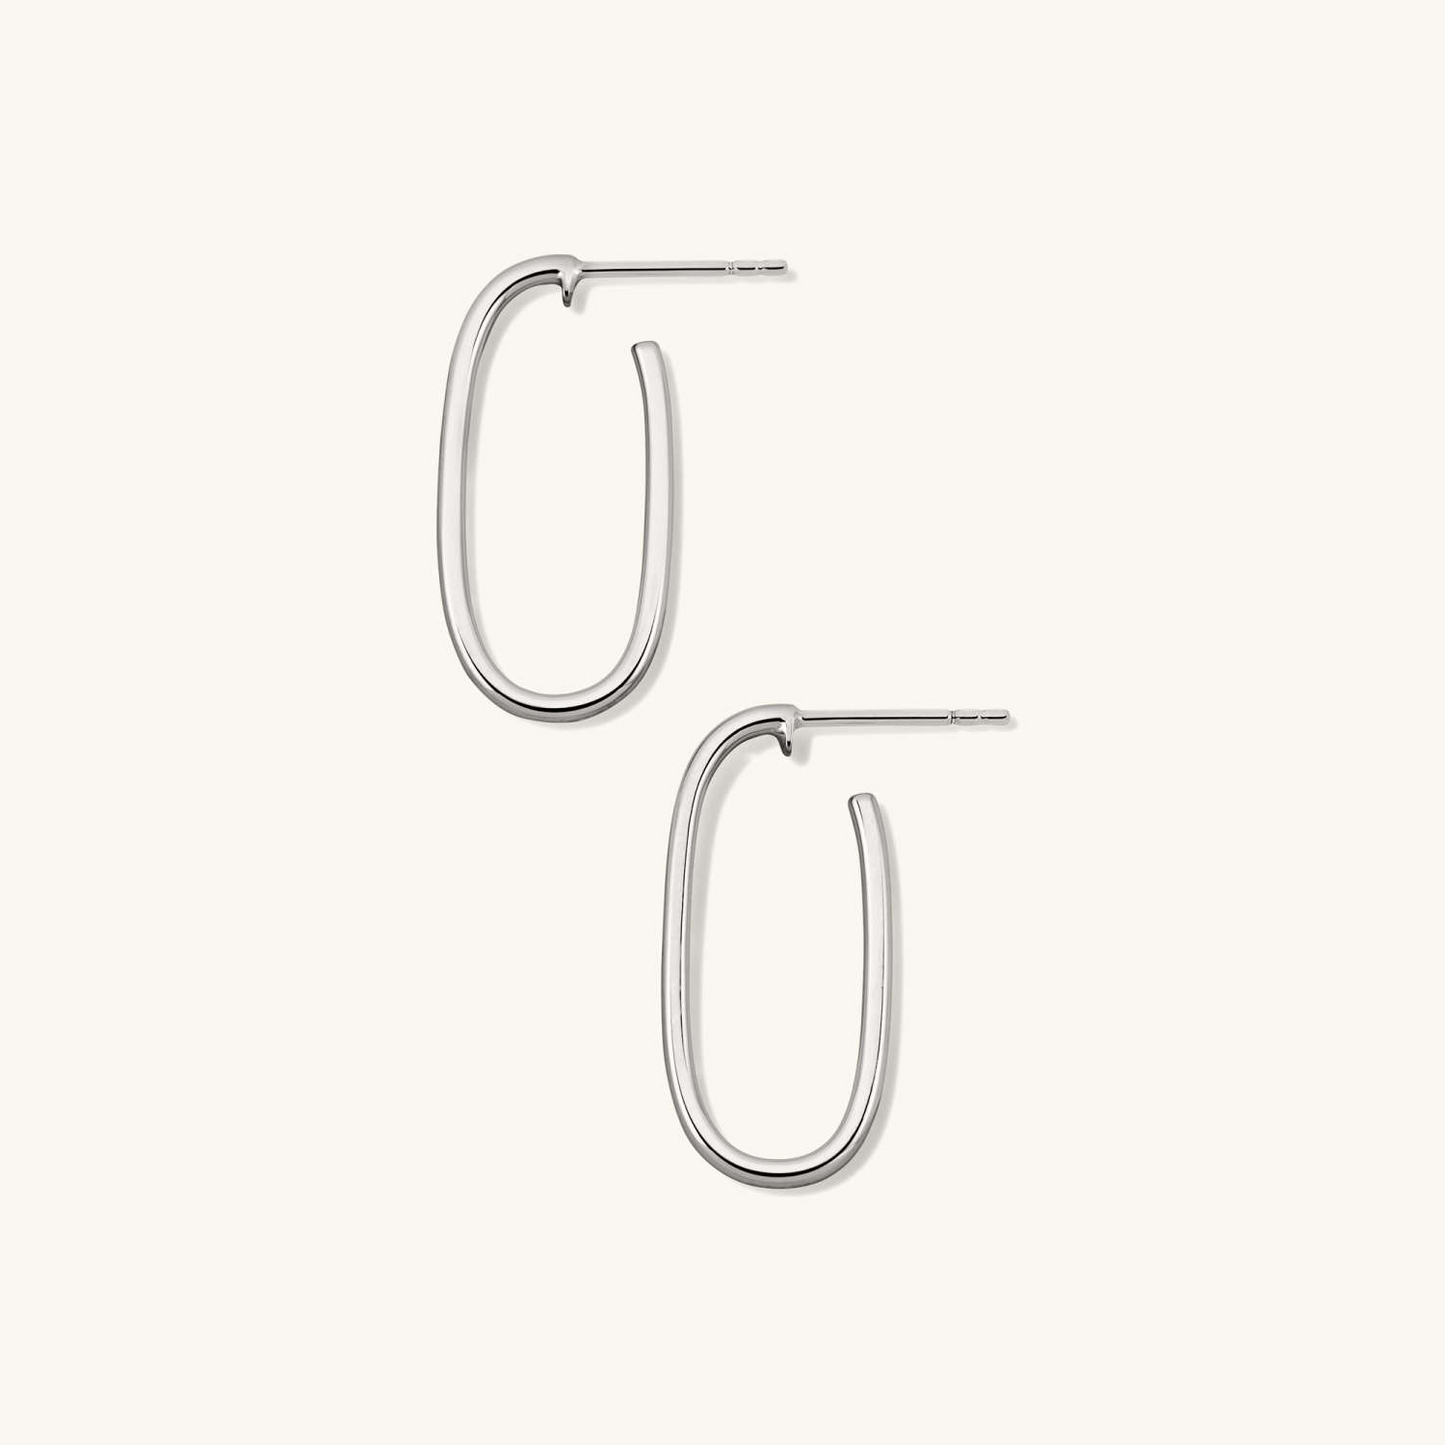 Paperclip Large And Modern 14K Gold Hoops Earrings